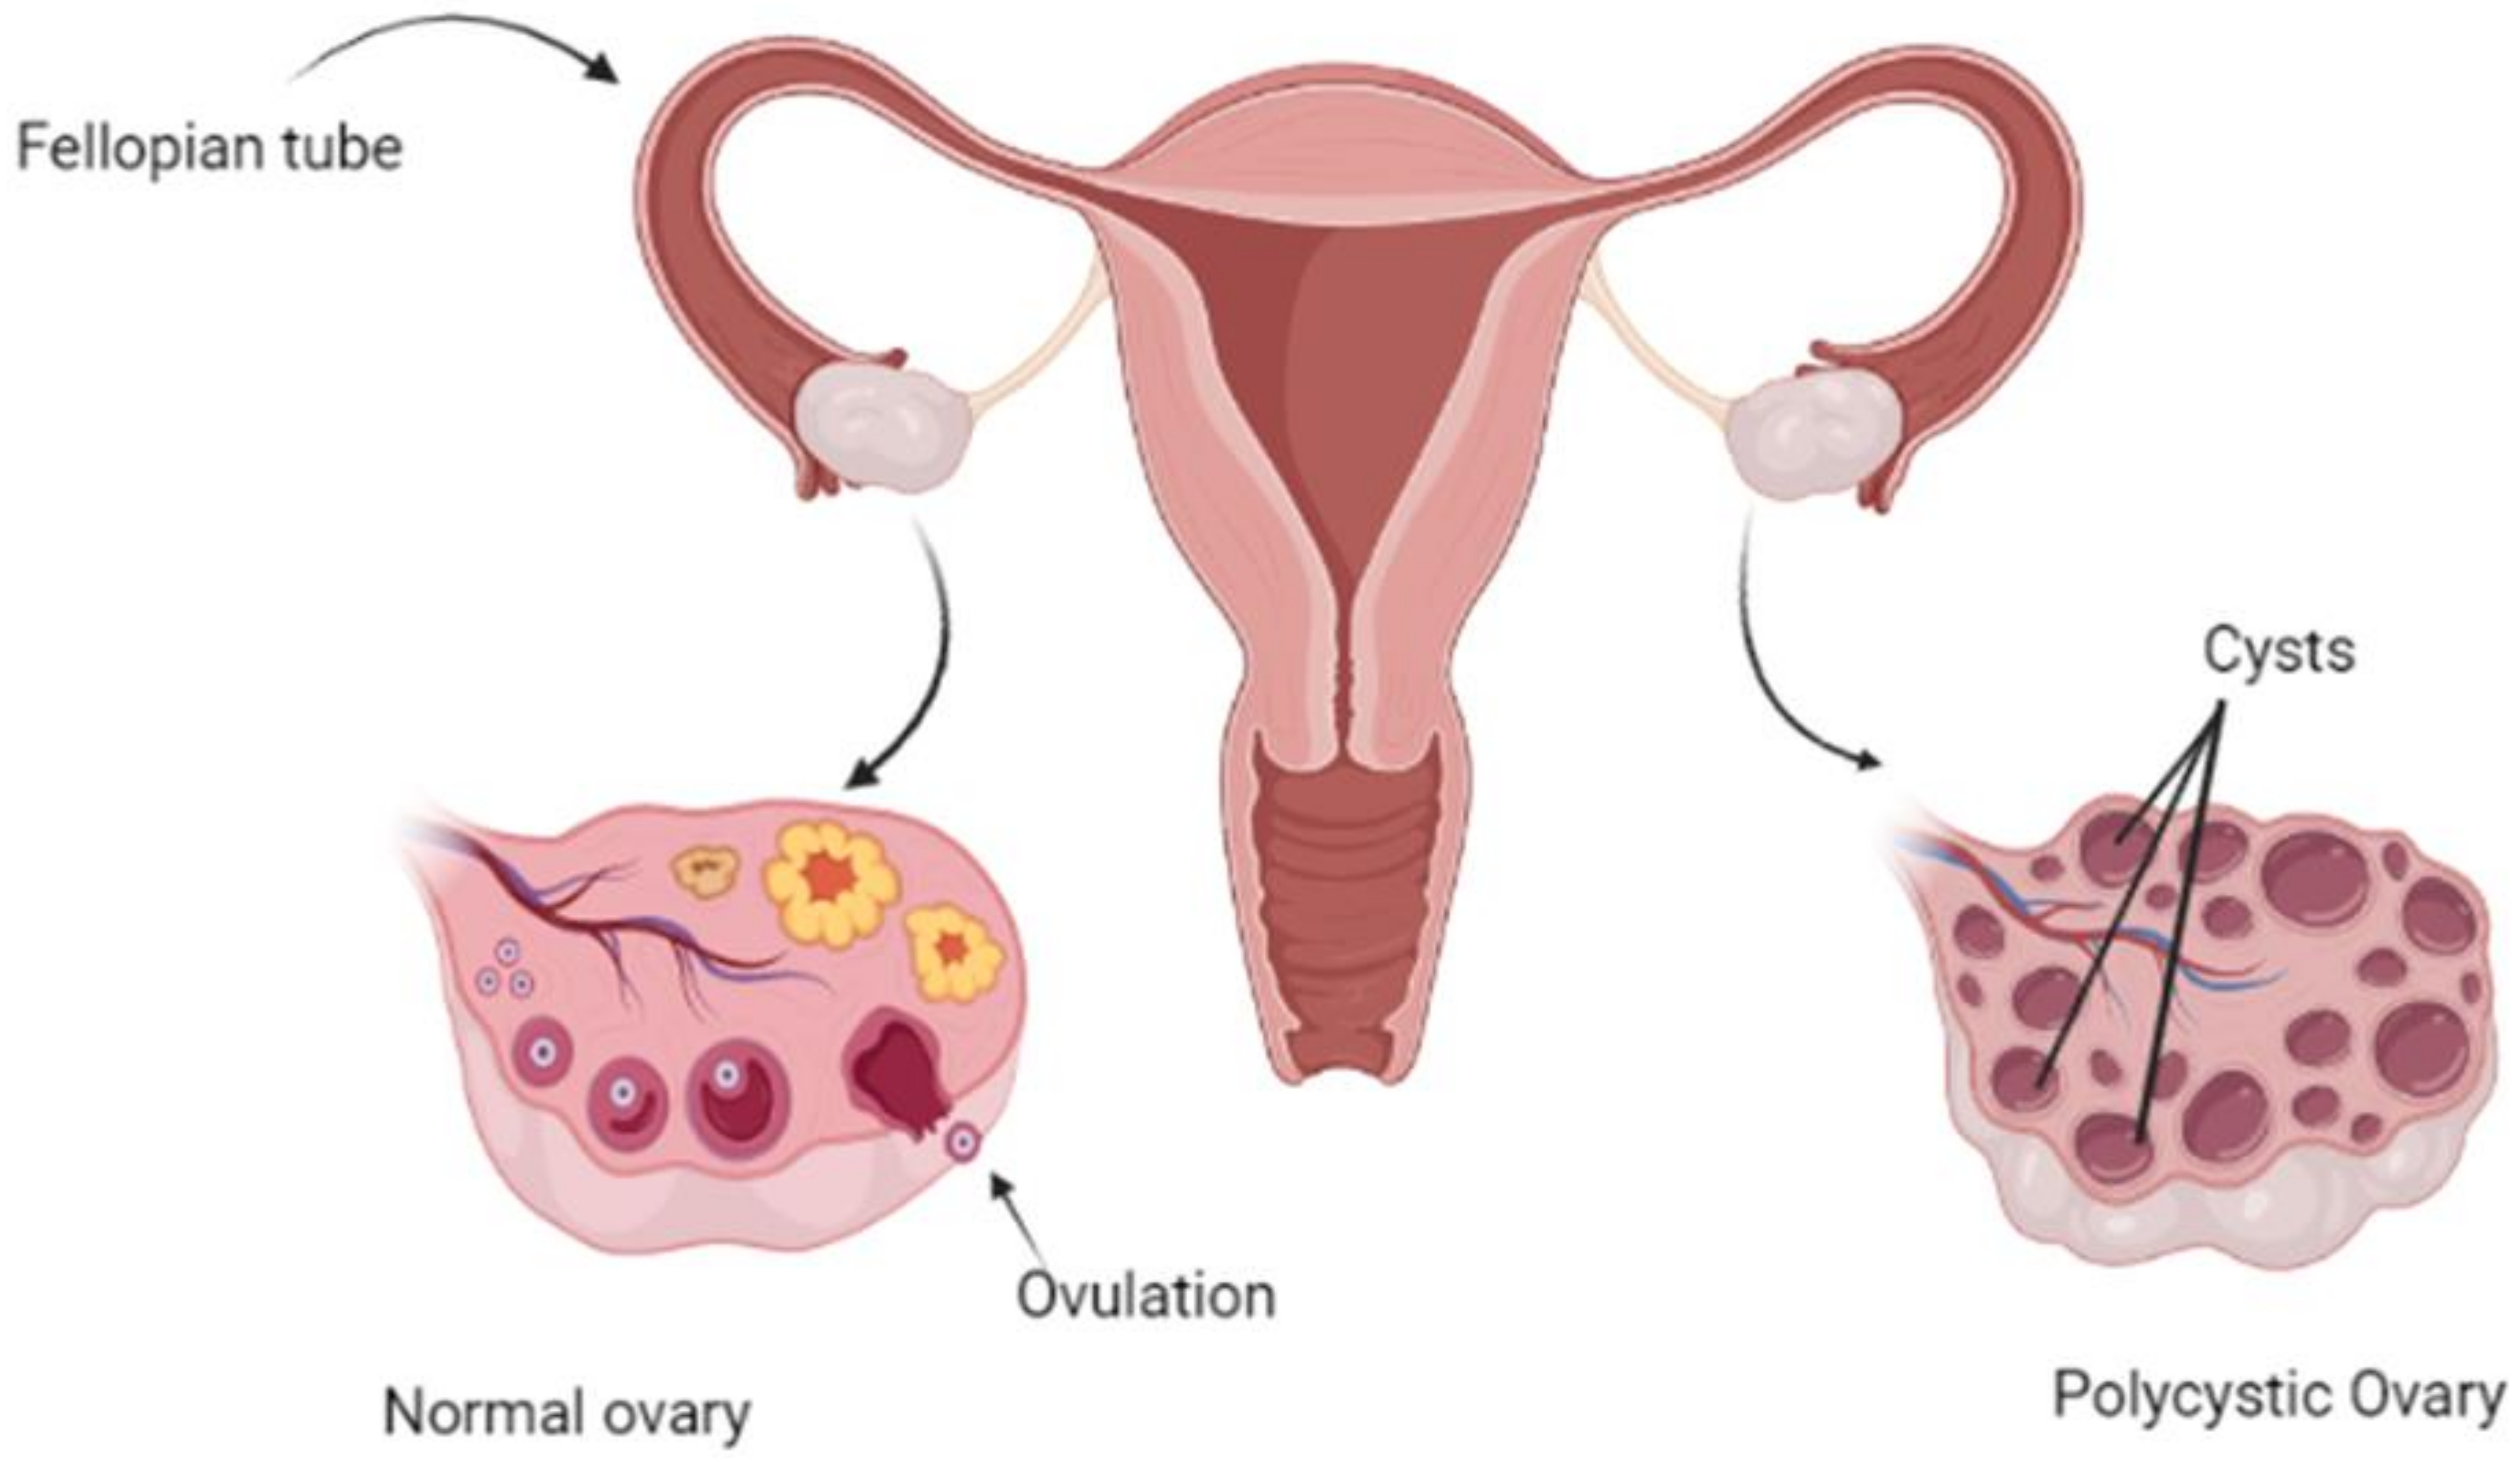 Biomedicines | Free Full-Text | Polycystic Ovarian Syndrome: A Complex Disease with a Genetics Approach